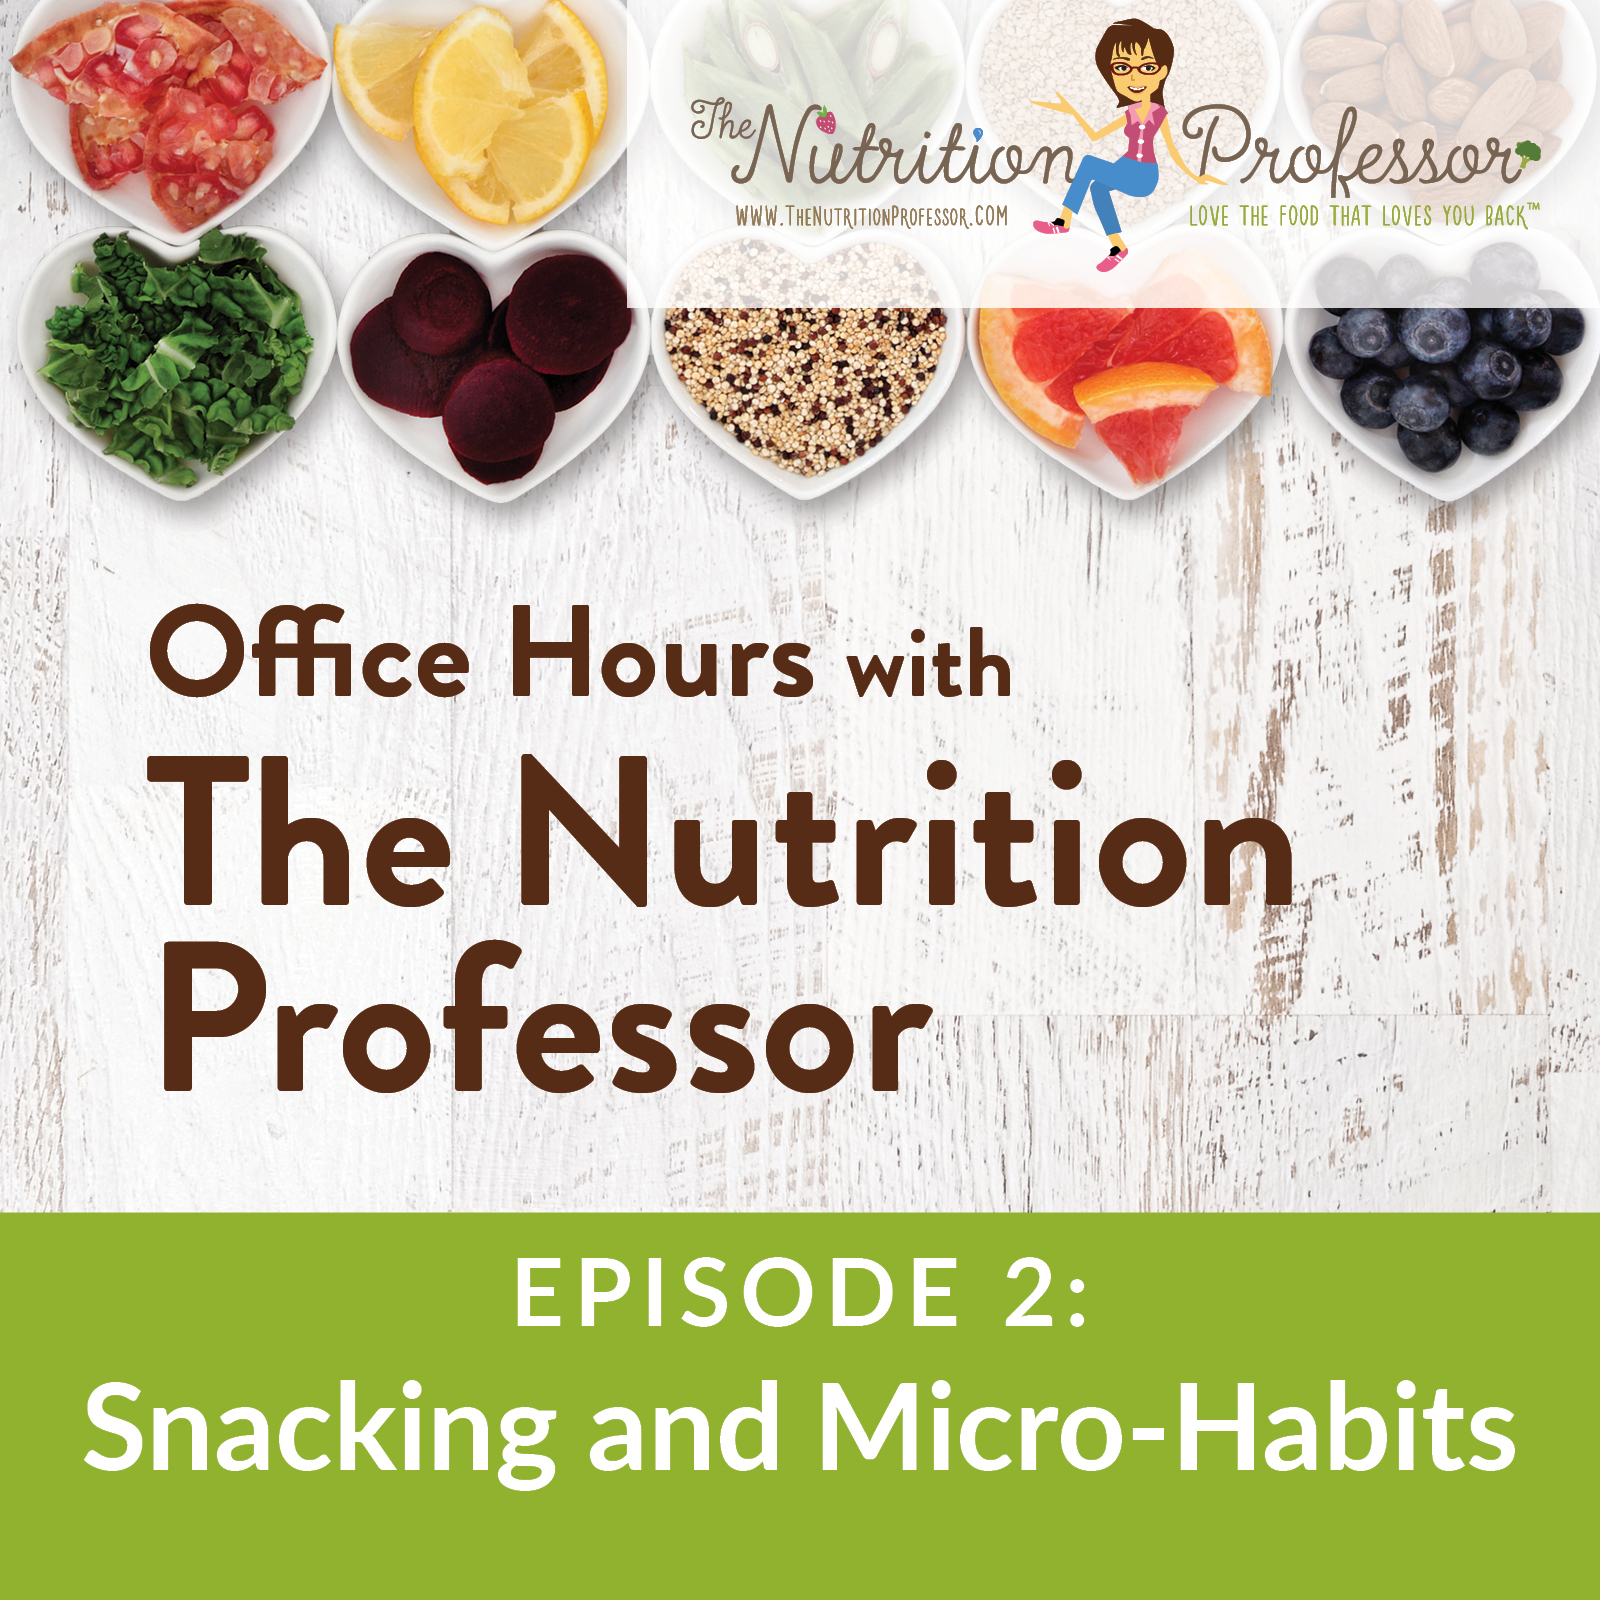 Podcast Episode 2: Snacking and Micro-Habits